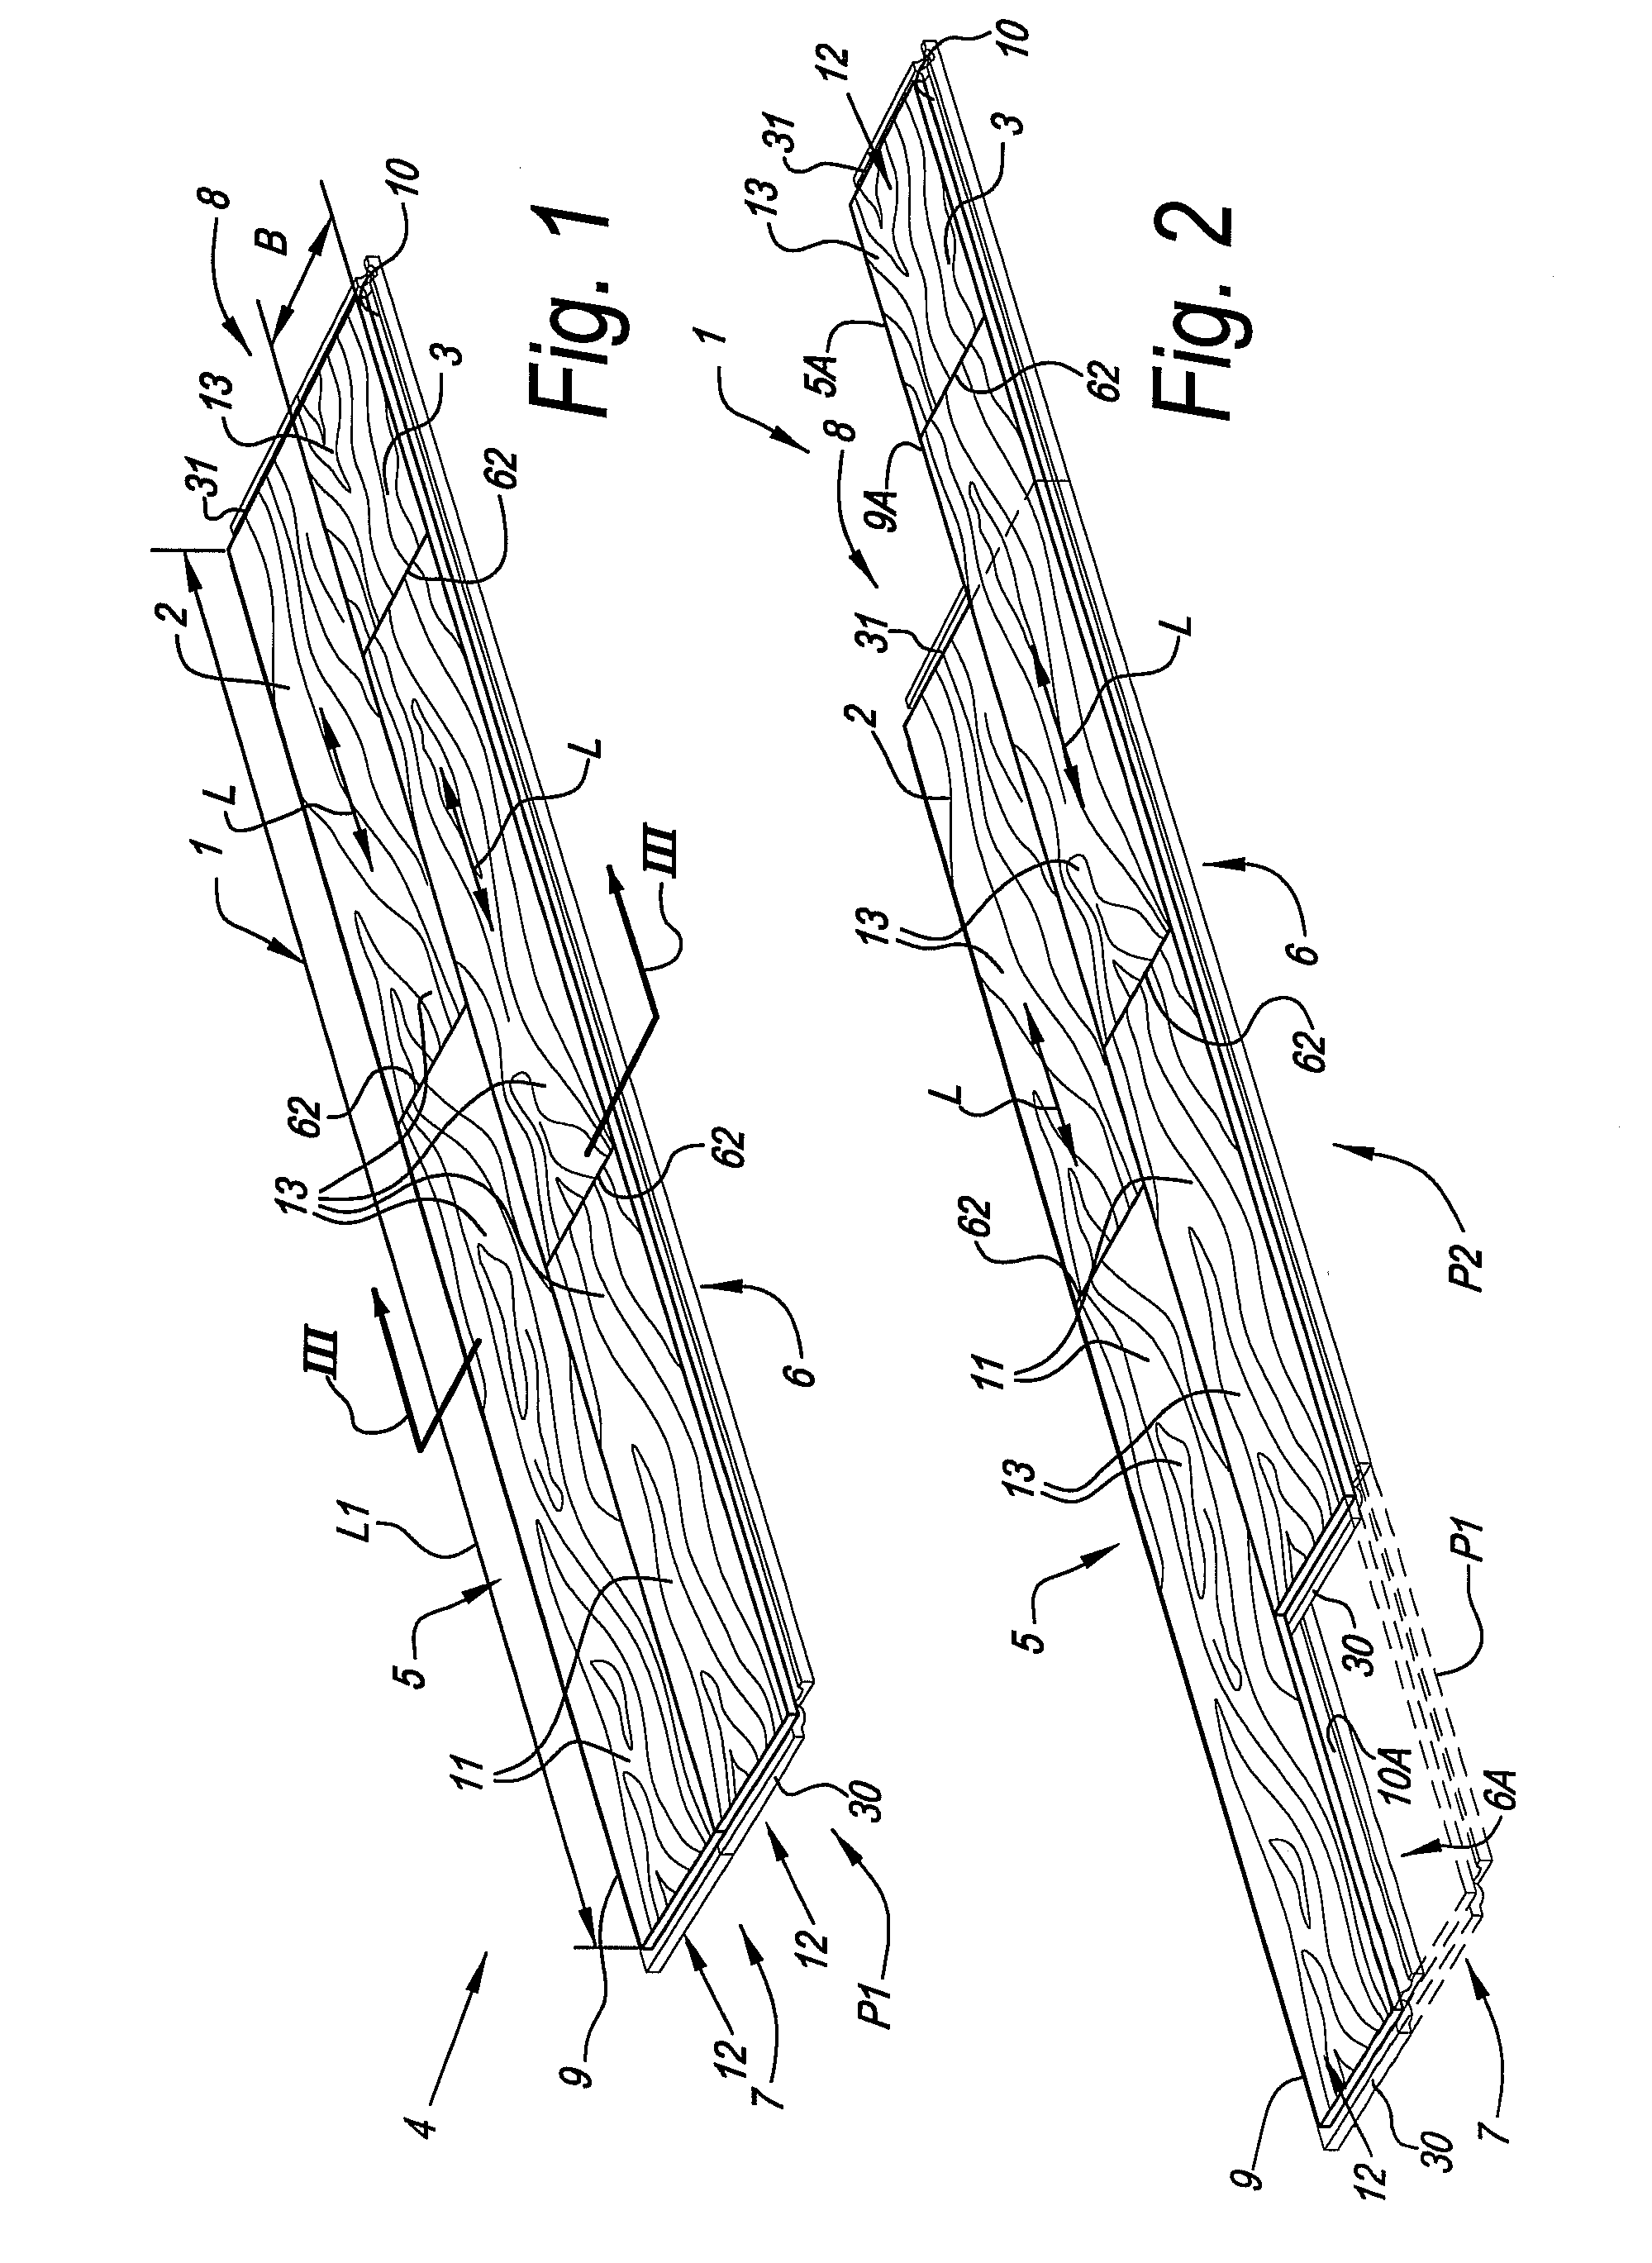 Floor element, locking system for floor elements, floor covering and method for composing such floor elements to a floor covering